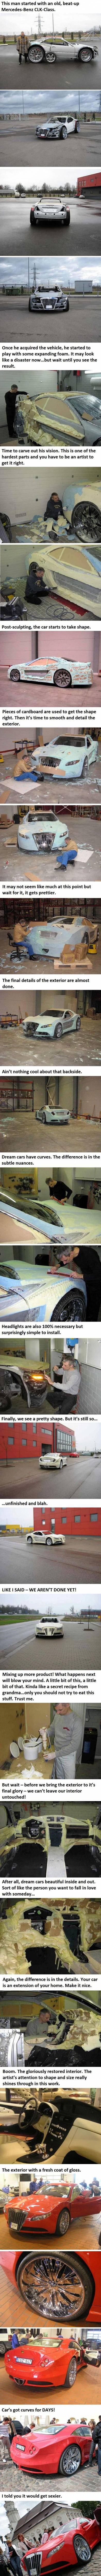 This Guy Transformed His Ugly Car Into Something Marvelous... -   Misc